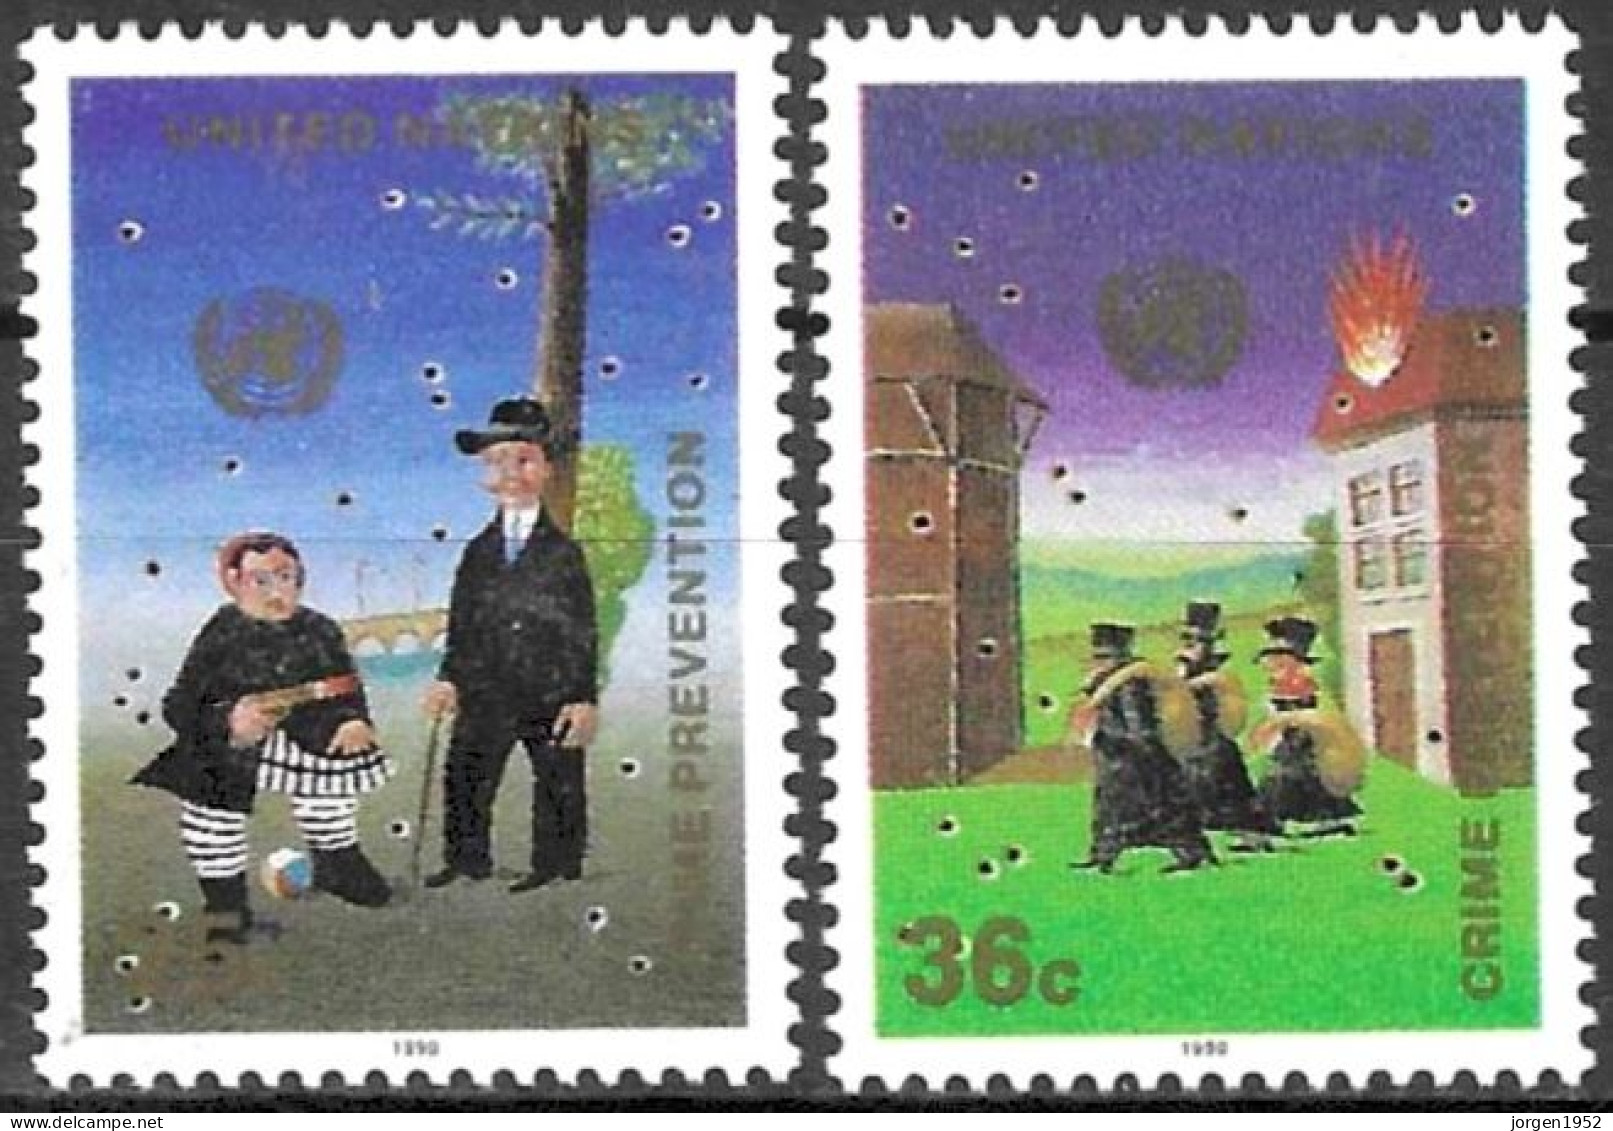 UNITED NATIONS # NEW YORK FROM 1990 STAMPWORLD 604-05** - Neufs